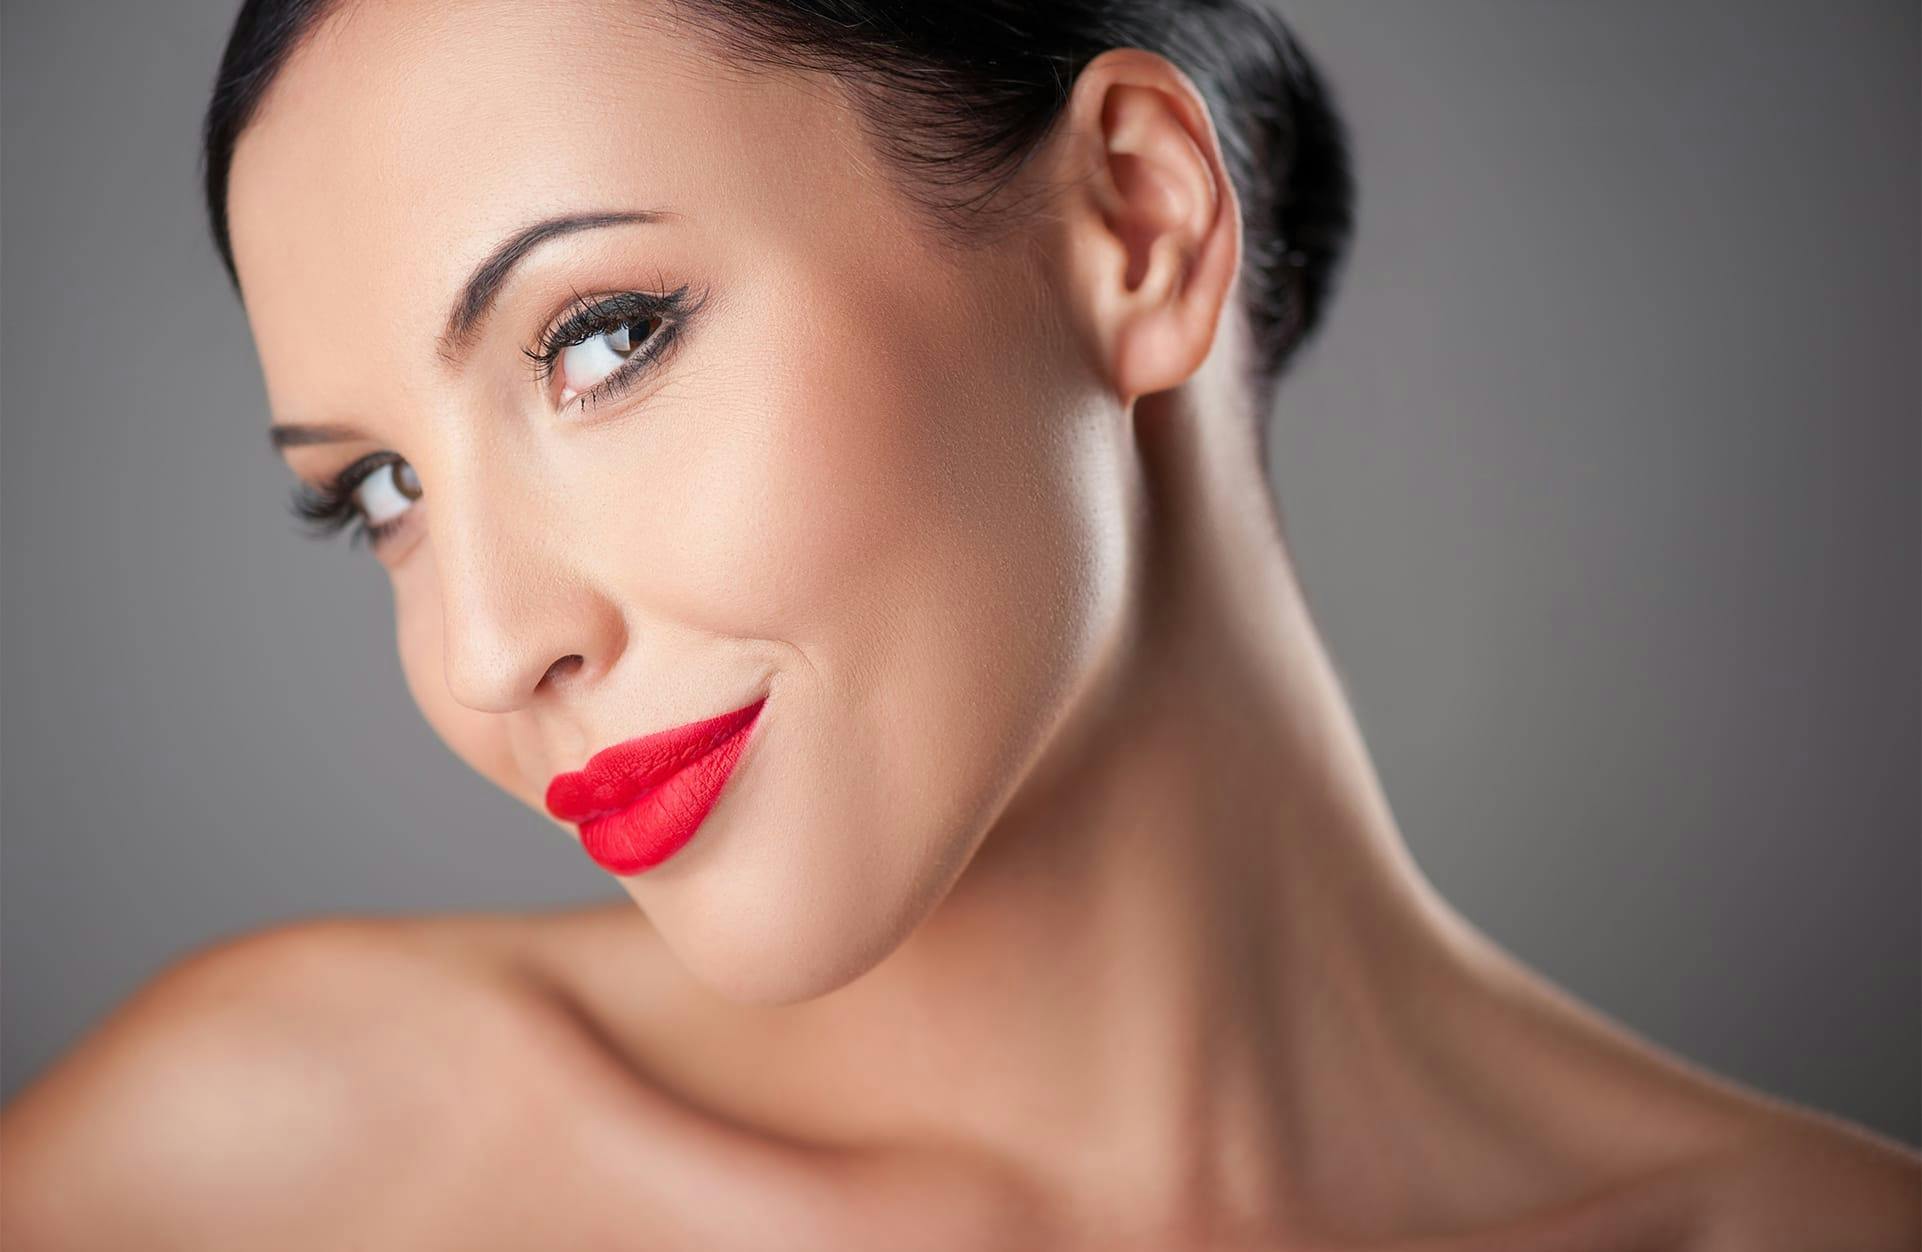 woman smiling with bright red lipstick